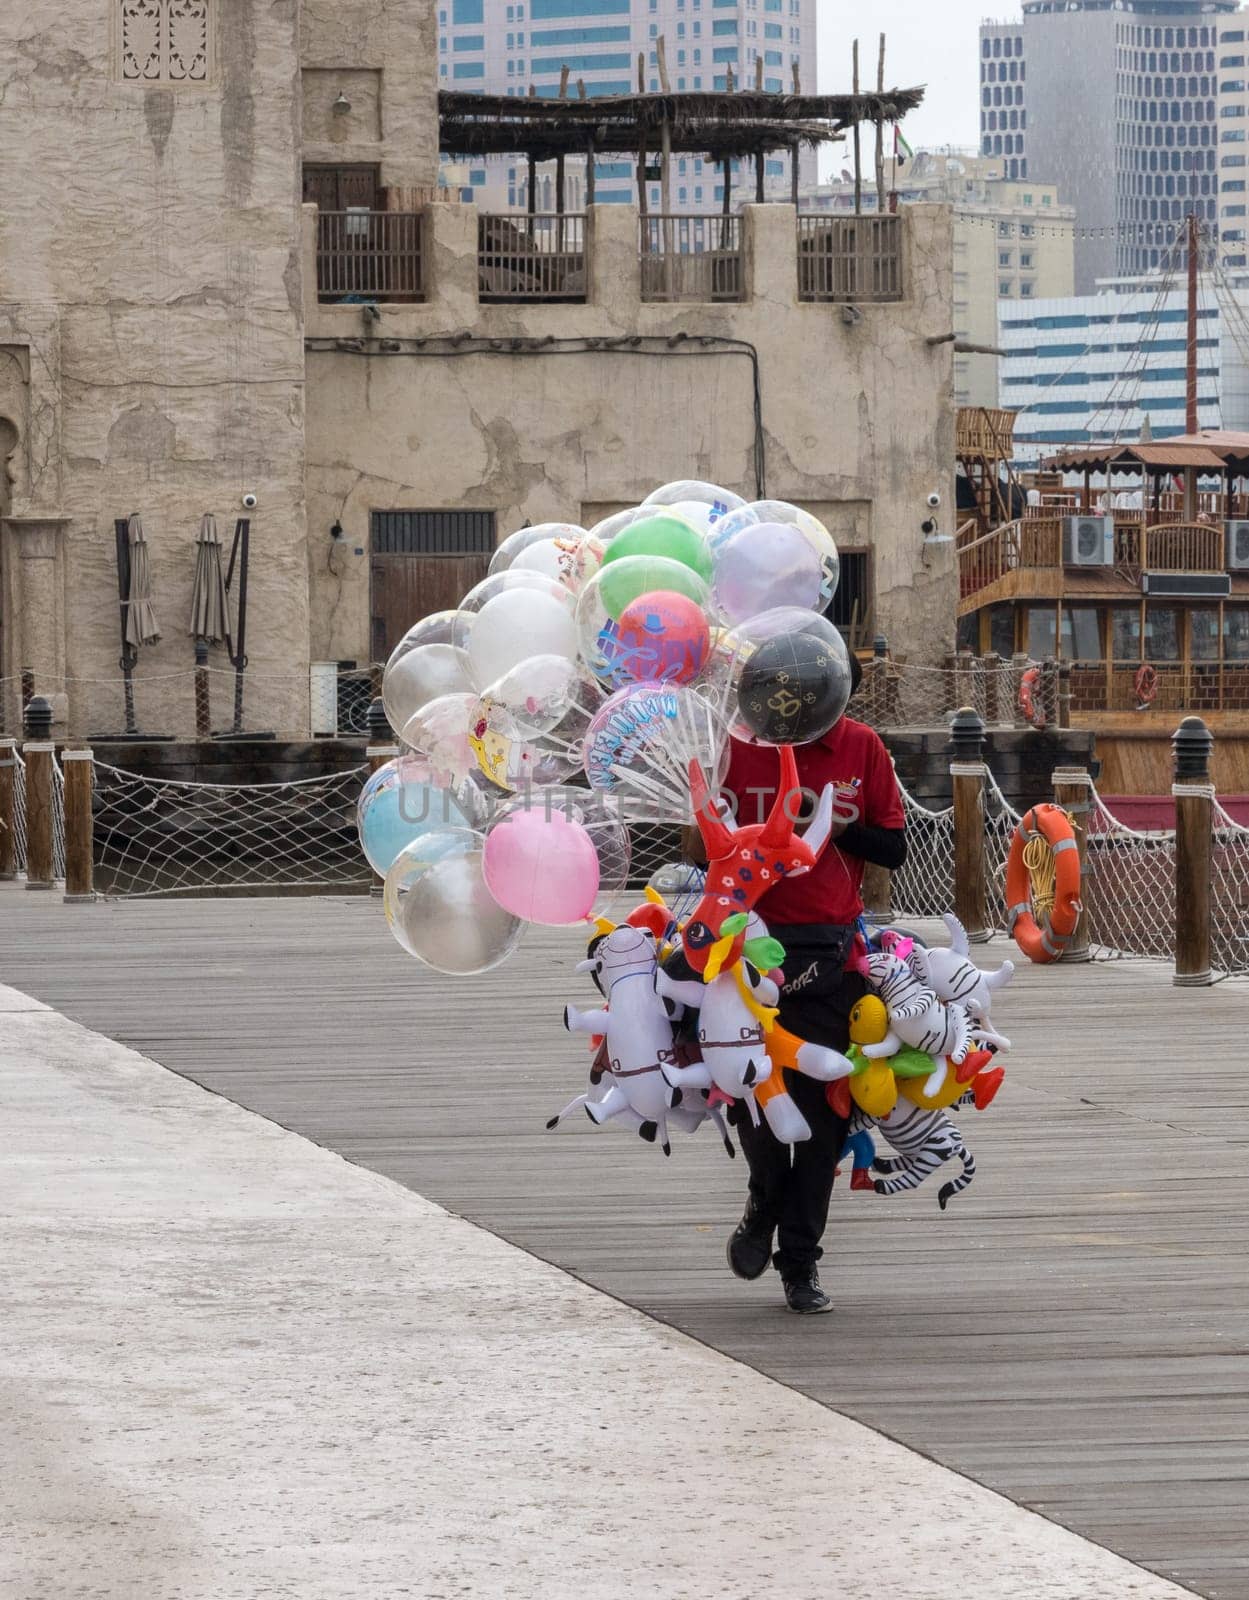 Street trader with balloons and animal toys on Al Seef boardwalk in Dubai, UAE